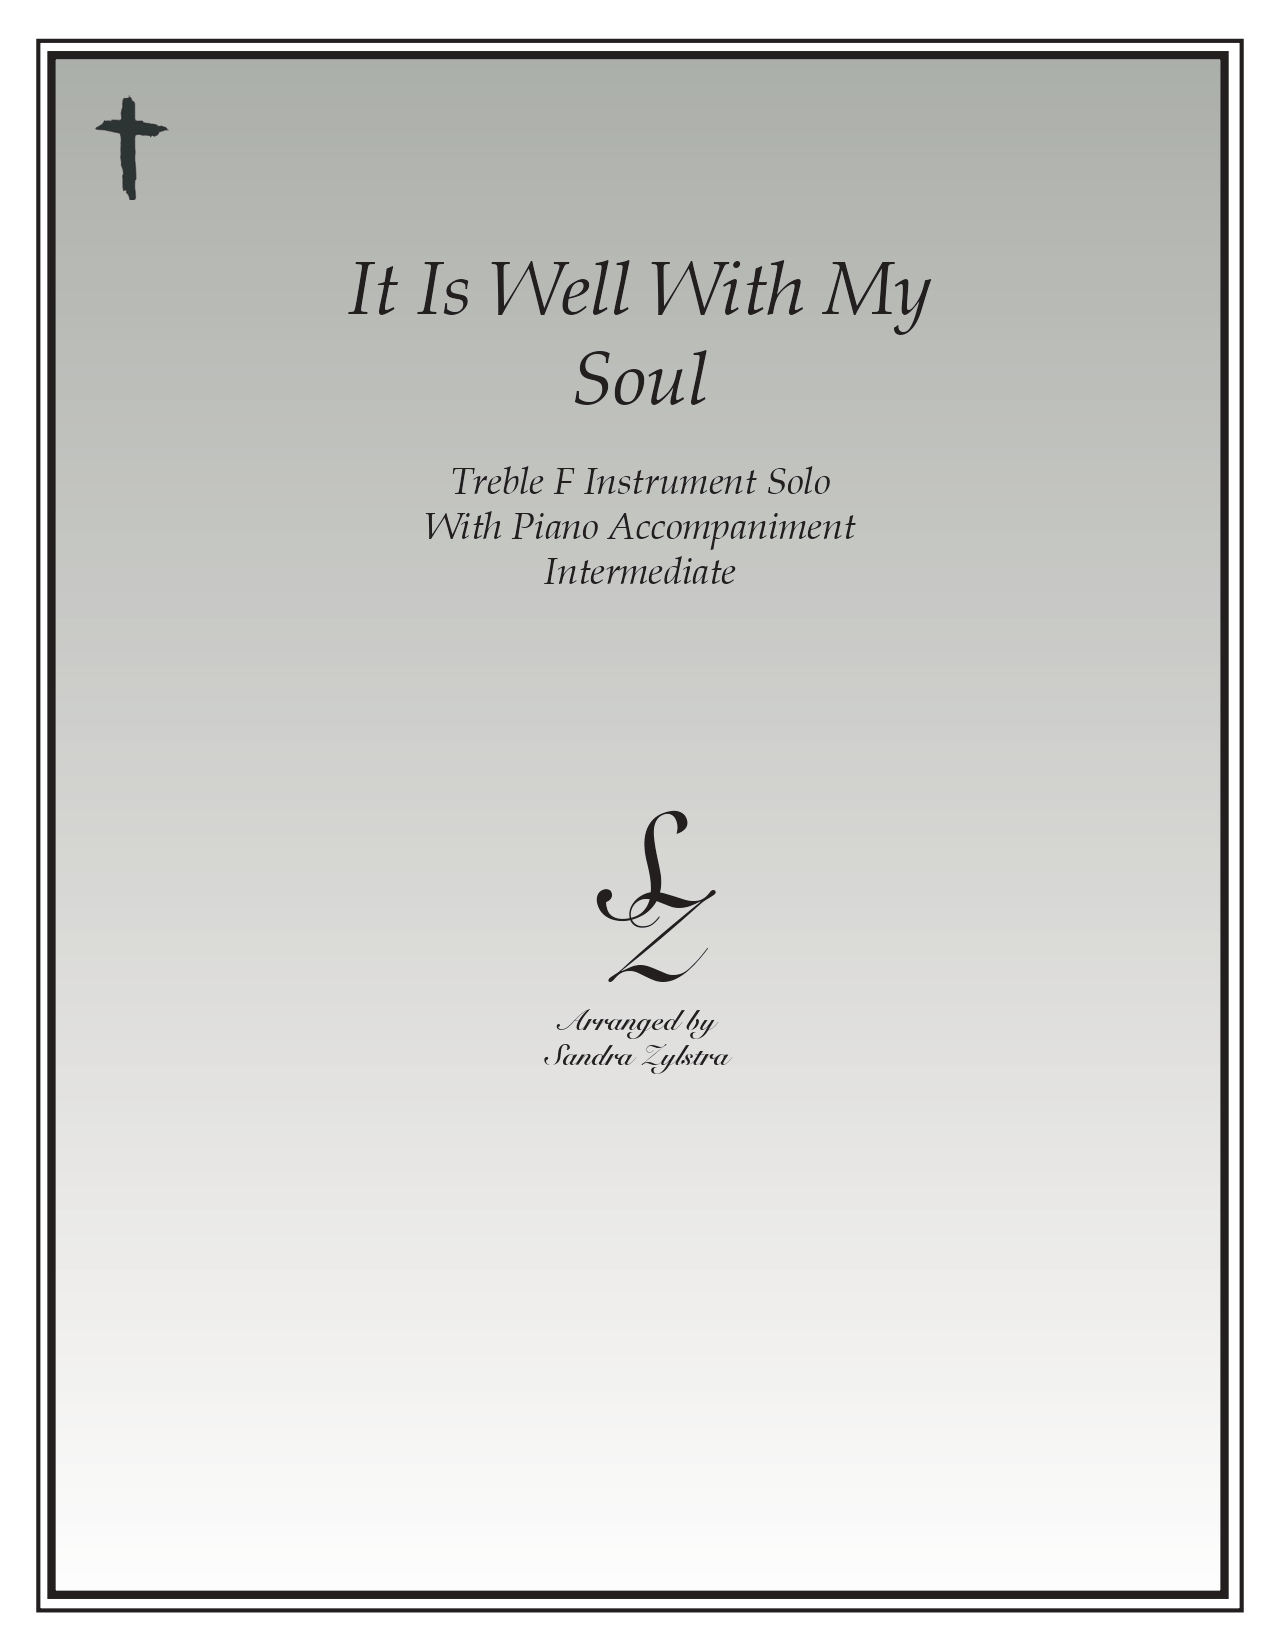 It Is Well With My Soul F instrument solo part cover page 00011